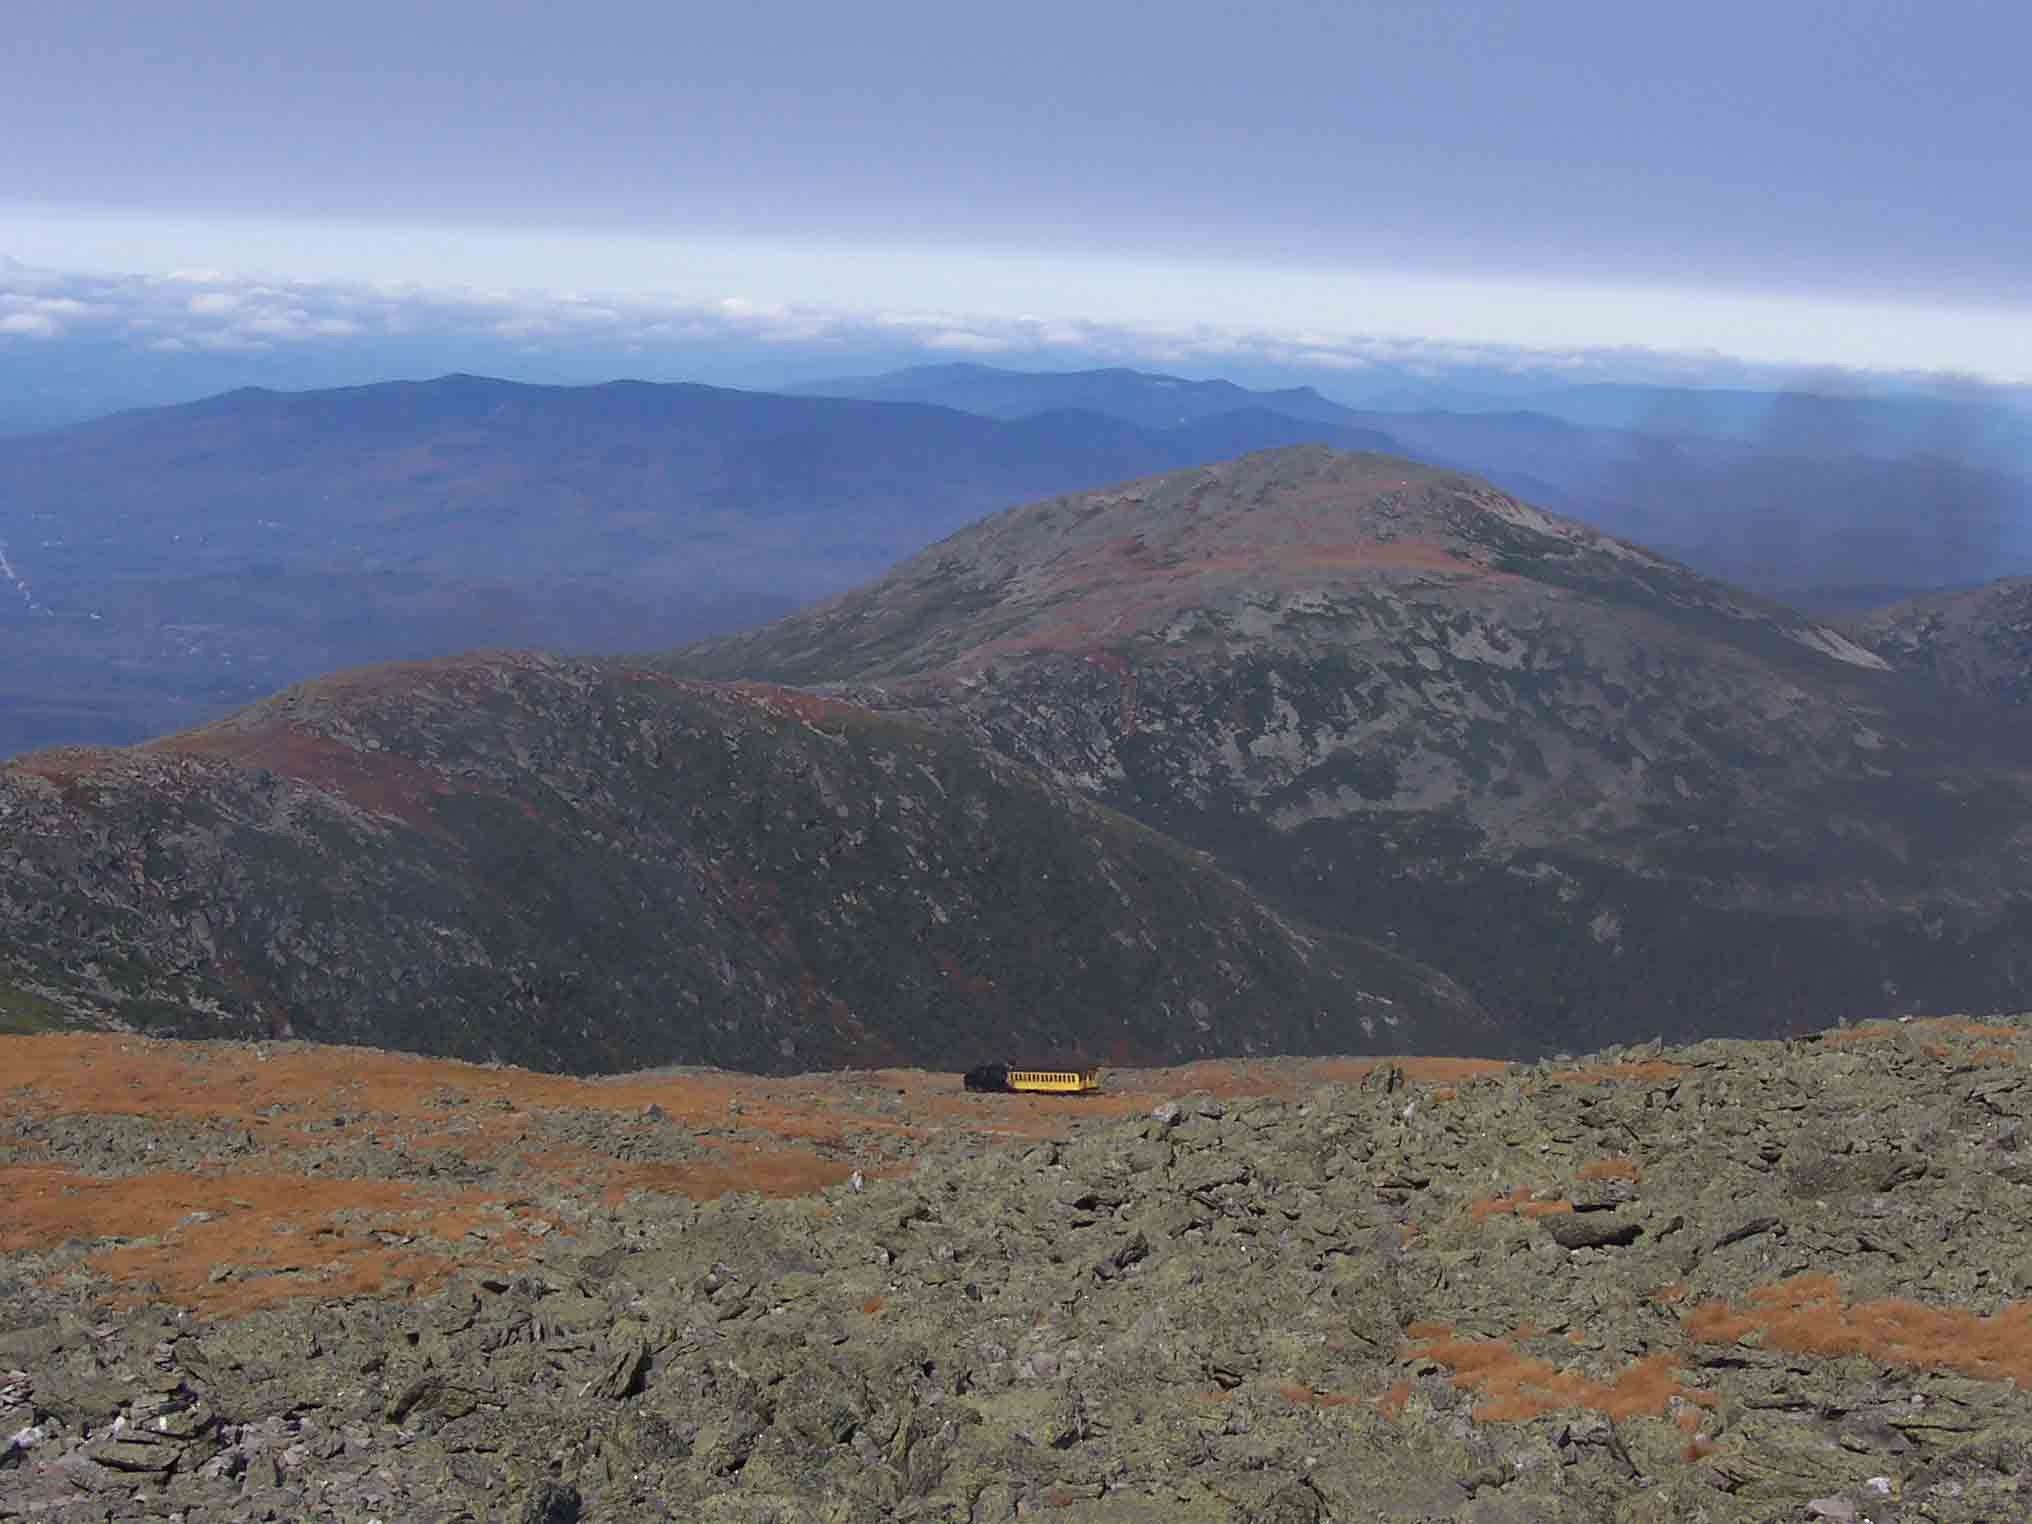 View north from north side of Mt. Washington. Mt. Jefferson is prominent peak in picture. The smaller peak in front of it is Mt. Clay which if the New Hampshire legislature has its way will become Mt. Reagan Note the cog railway train descending the mountain. Taken from approx. Mile 13.3.   Courtesy dlcul@conncoll.edu